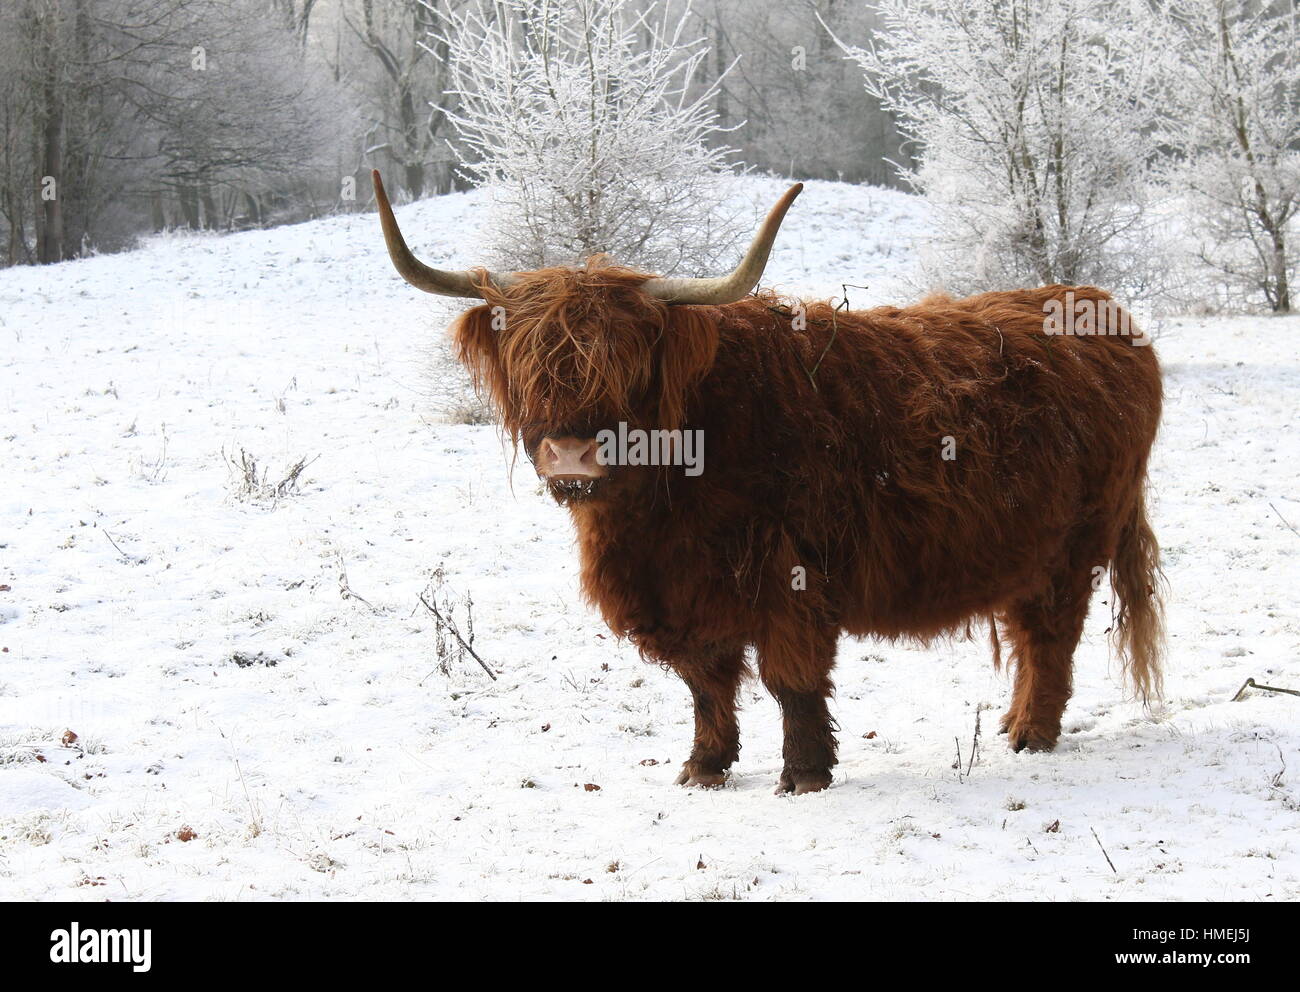 Highland cattle in a forest clearing in winter Stock Photo